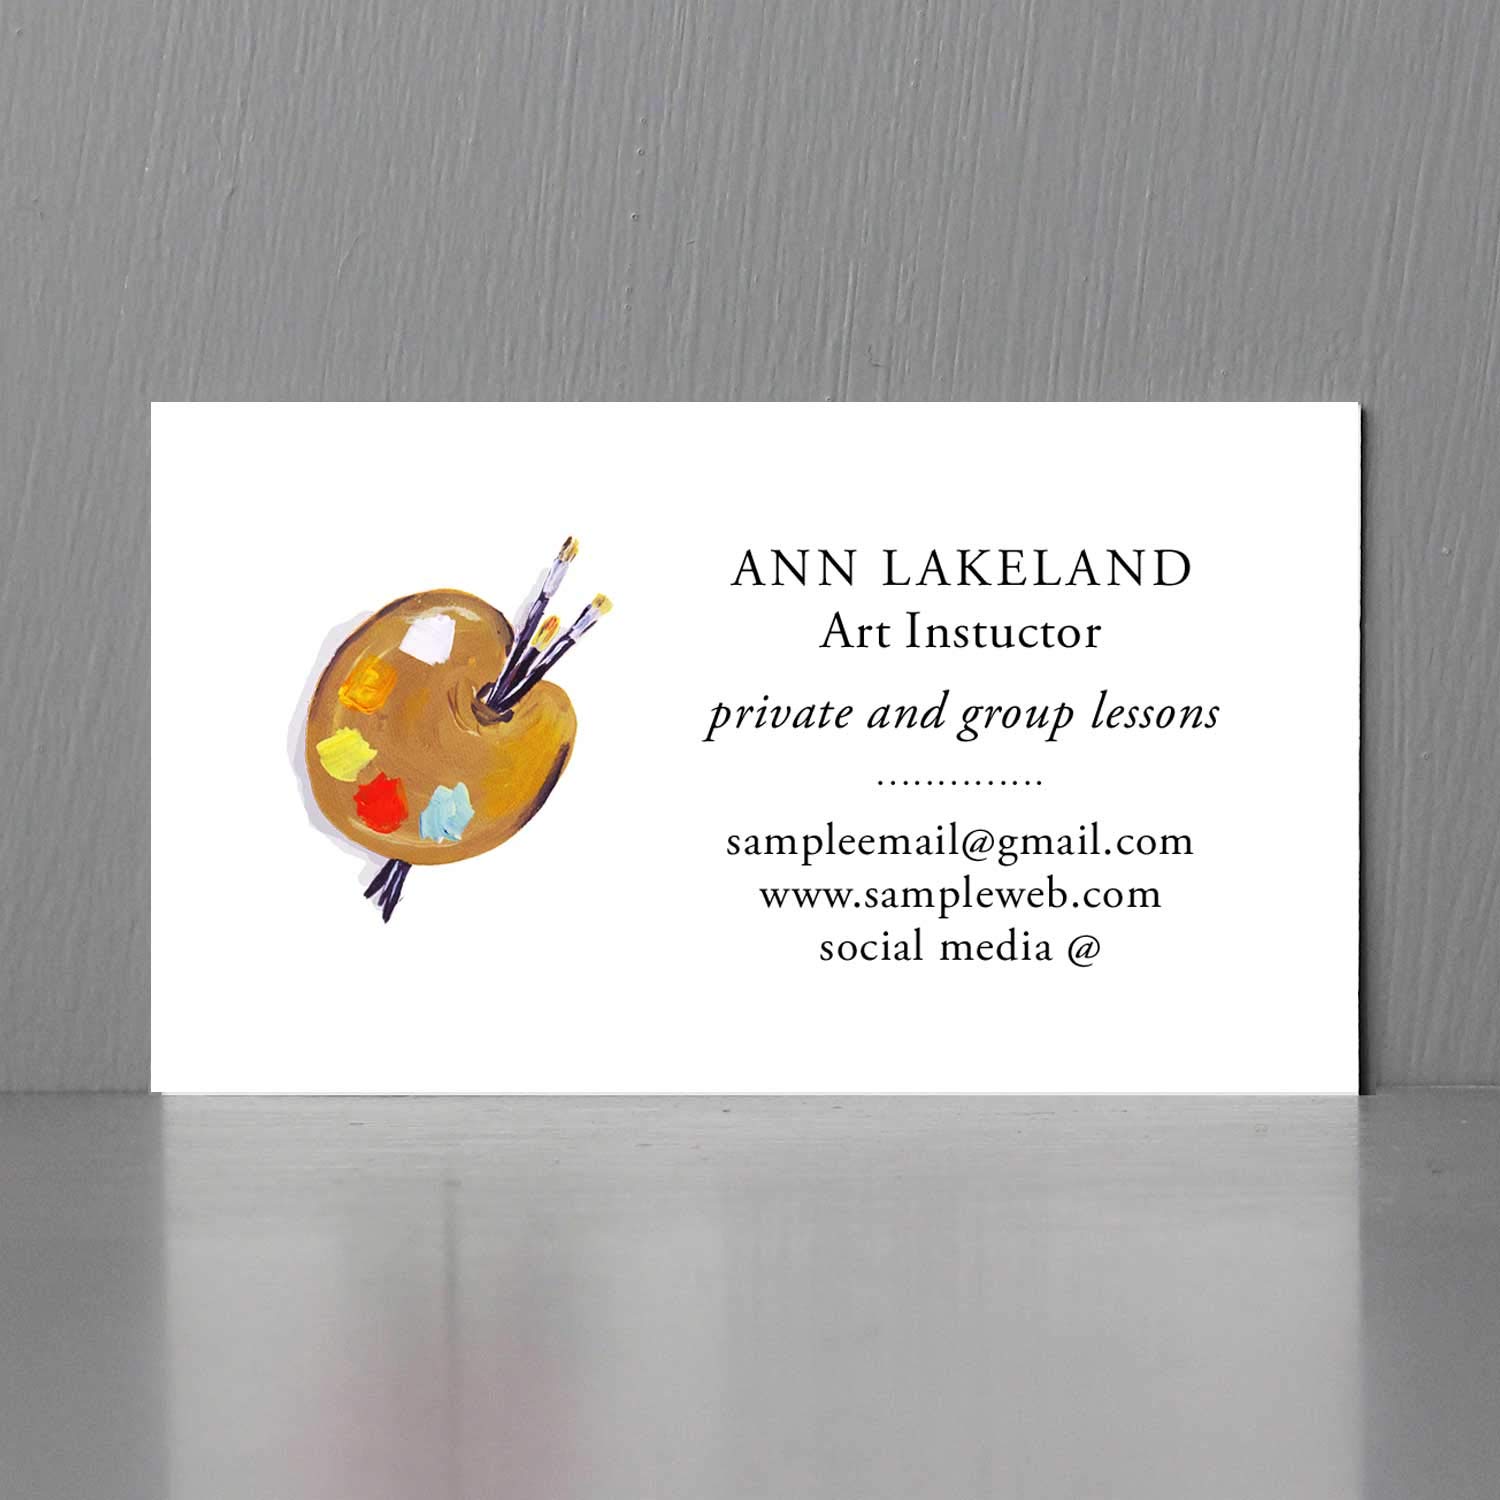 Business Card Ideas for Crafters